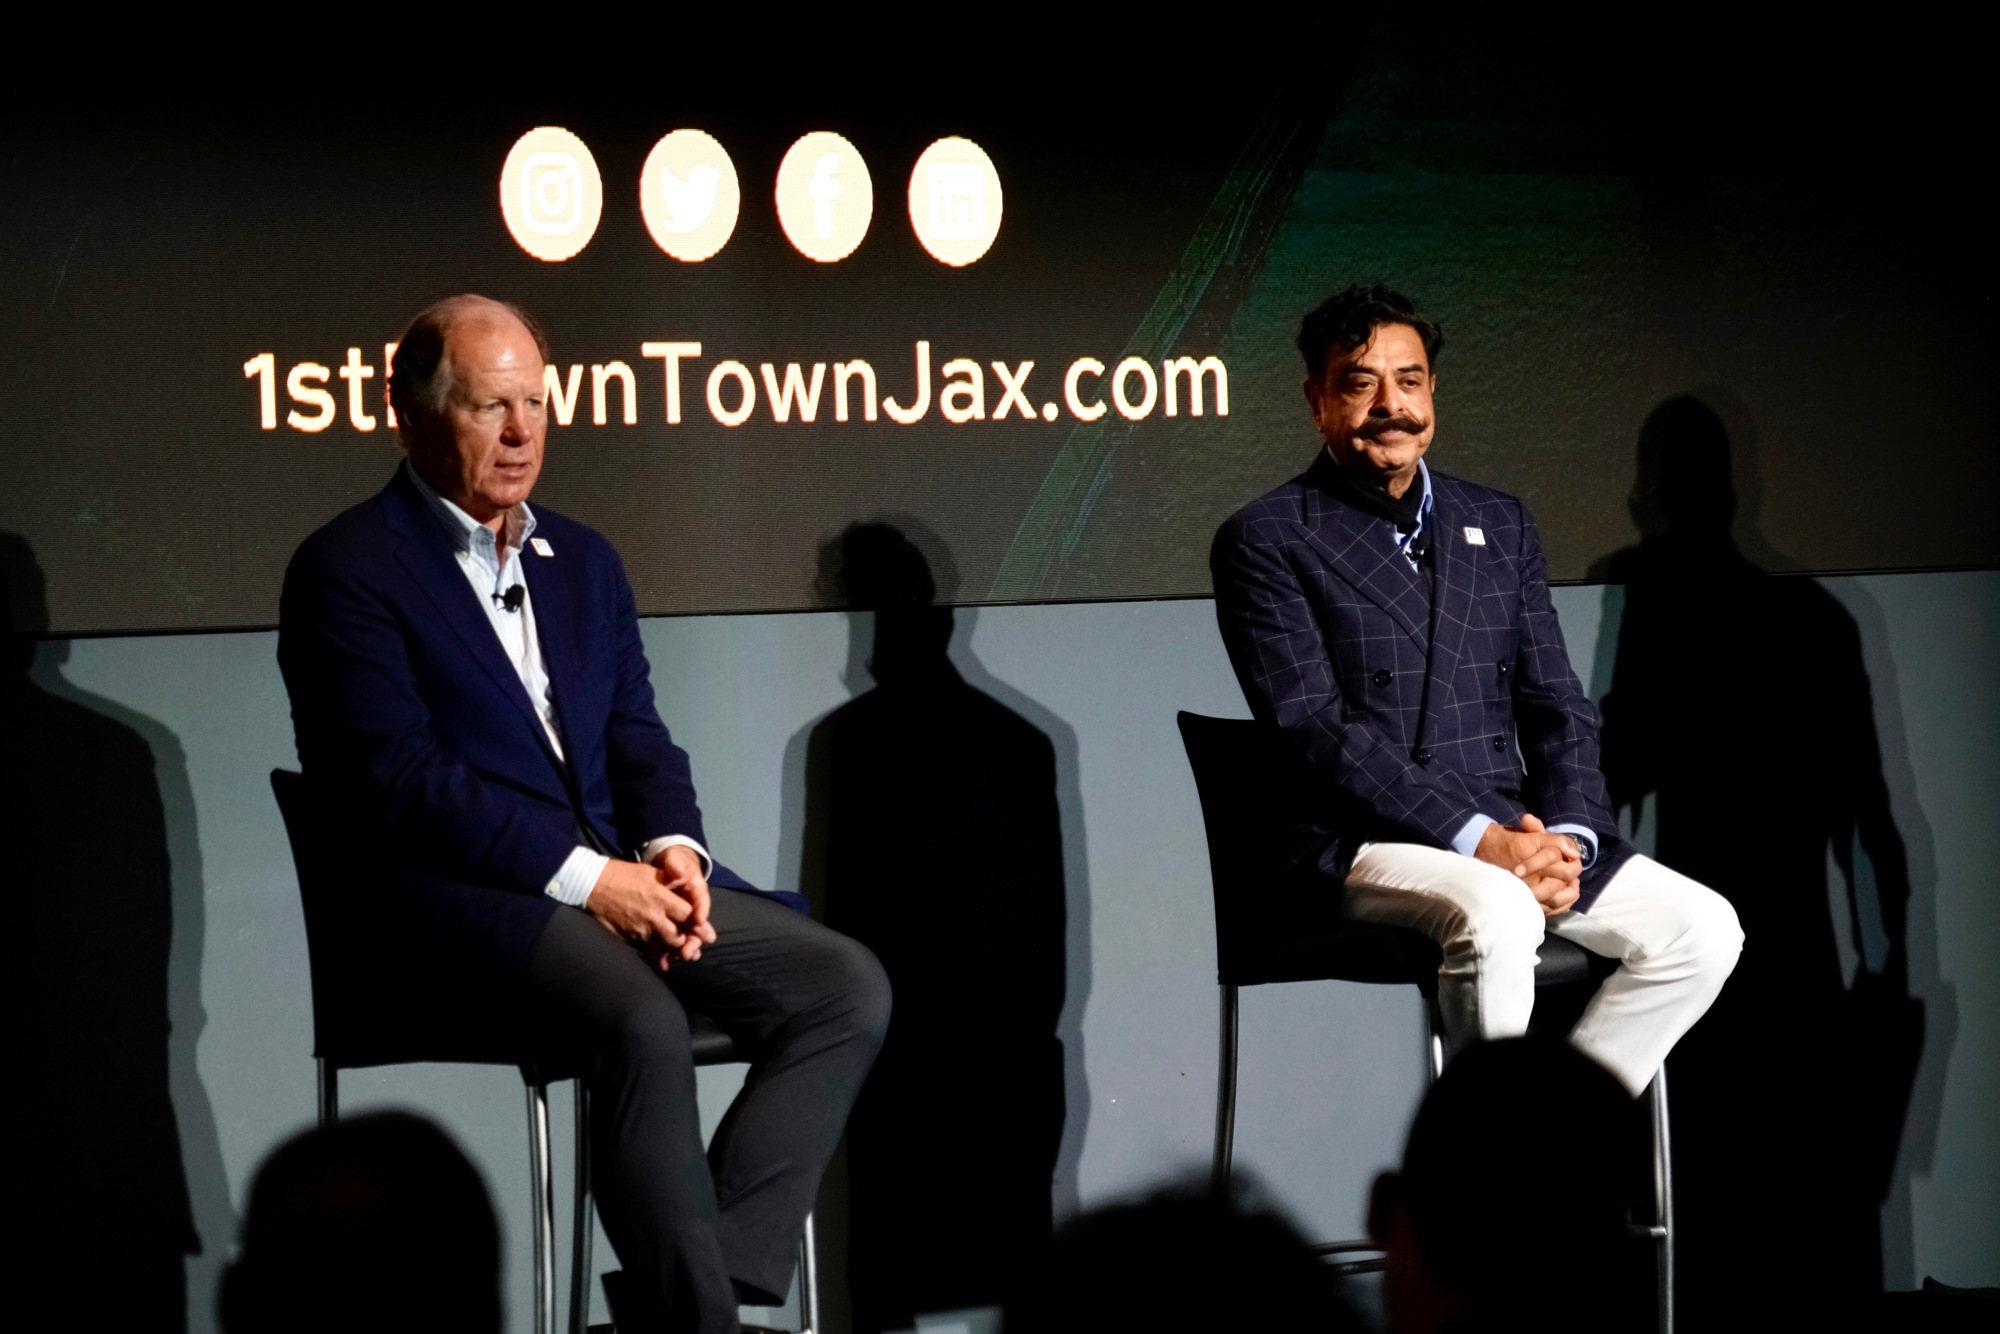 Jacksonville Jaguars President Mark Lamping and team owner Shad Khan present the plans for a Four Seasons Hotel Downtown on June 3 at TIAA Bank Field.